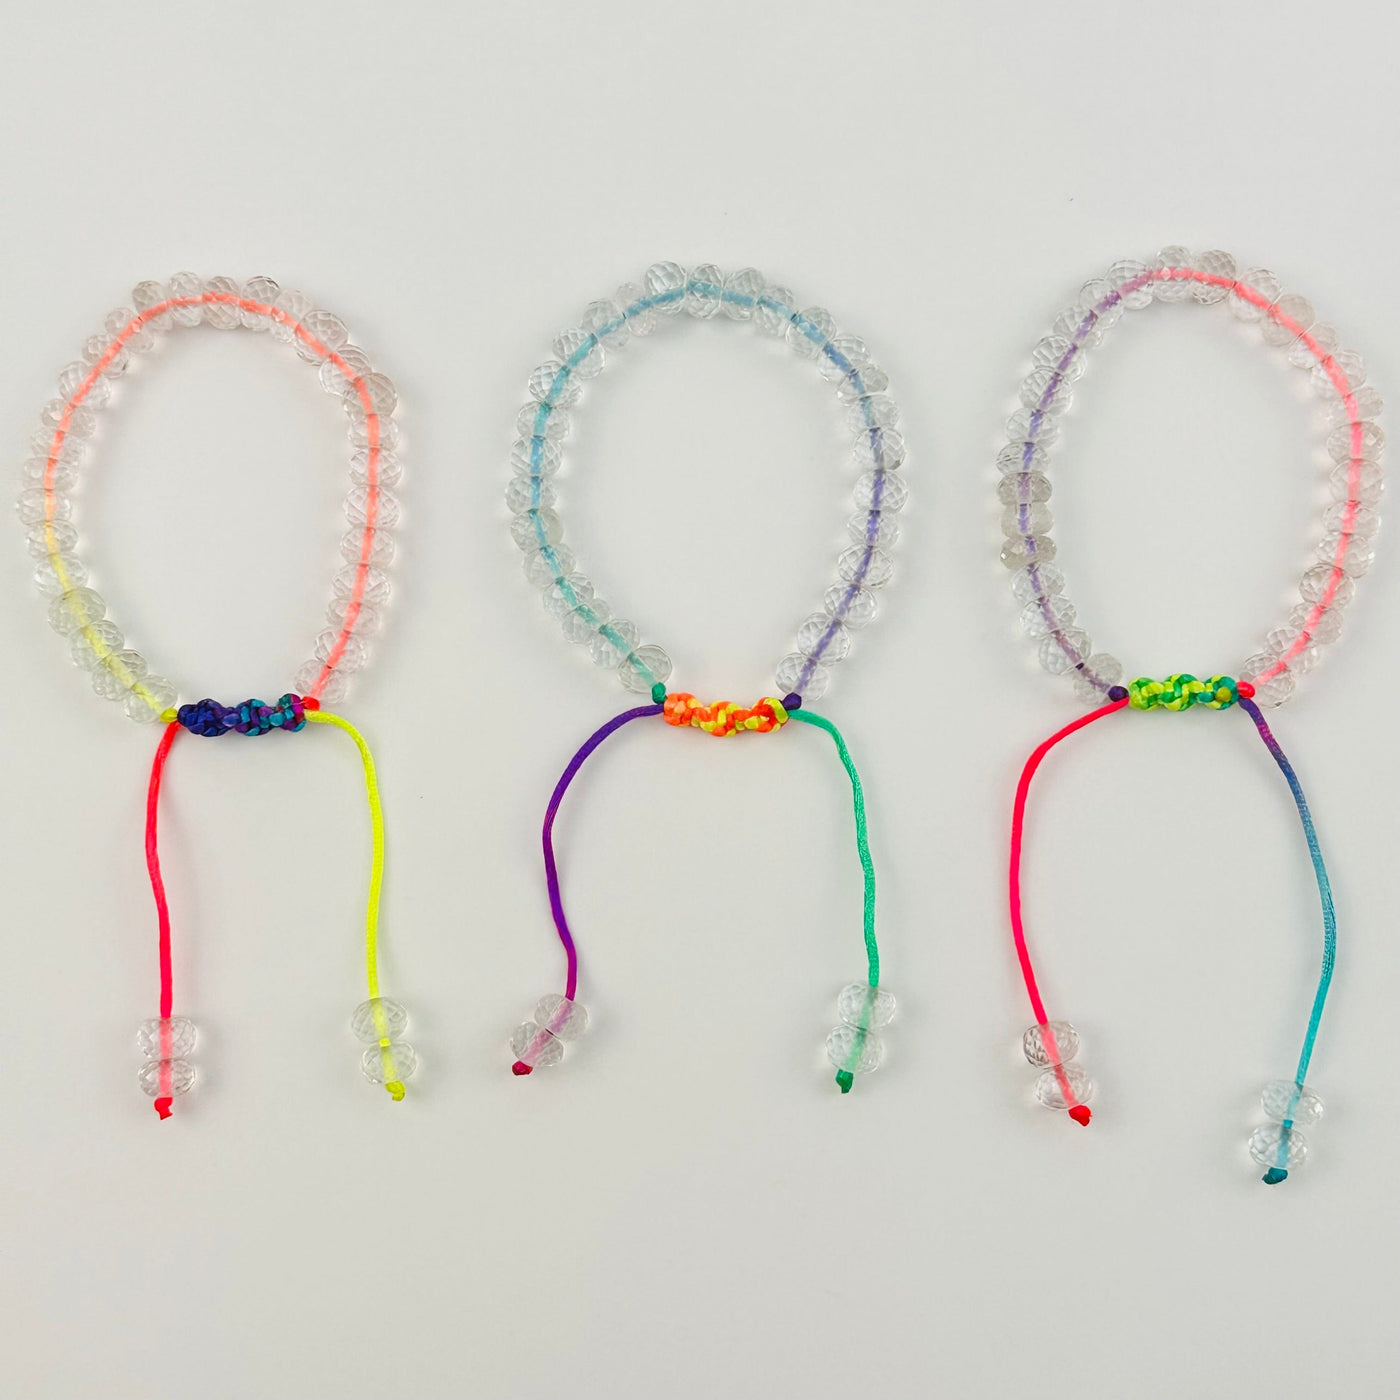 bracelets displayed to show the differences in the color shades on the string 